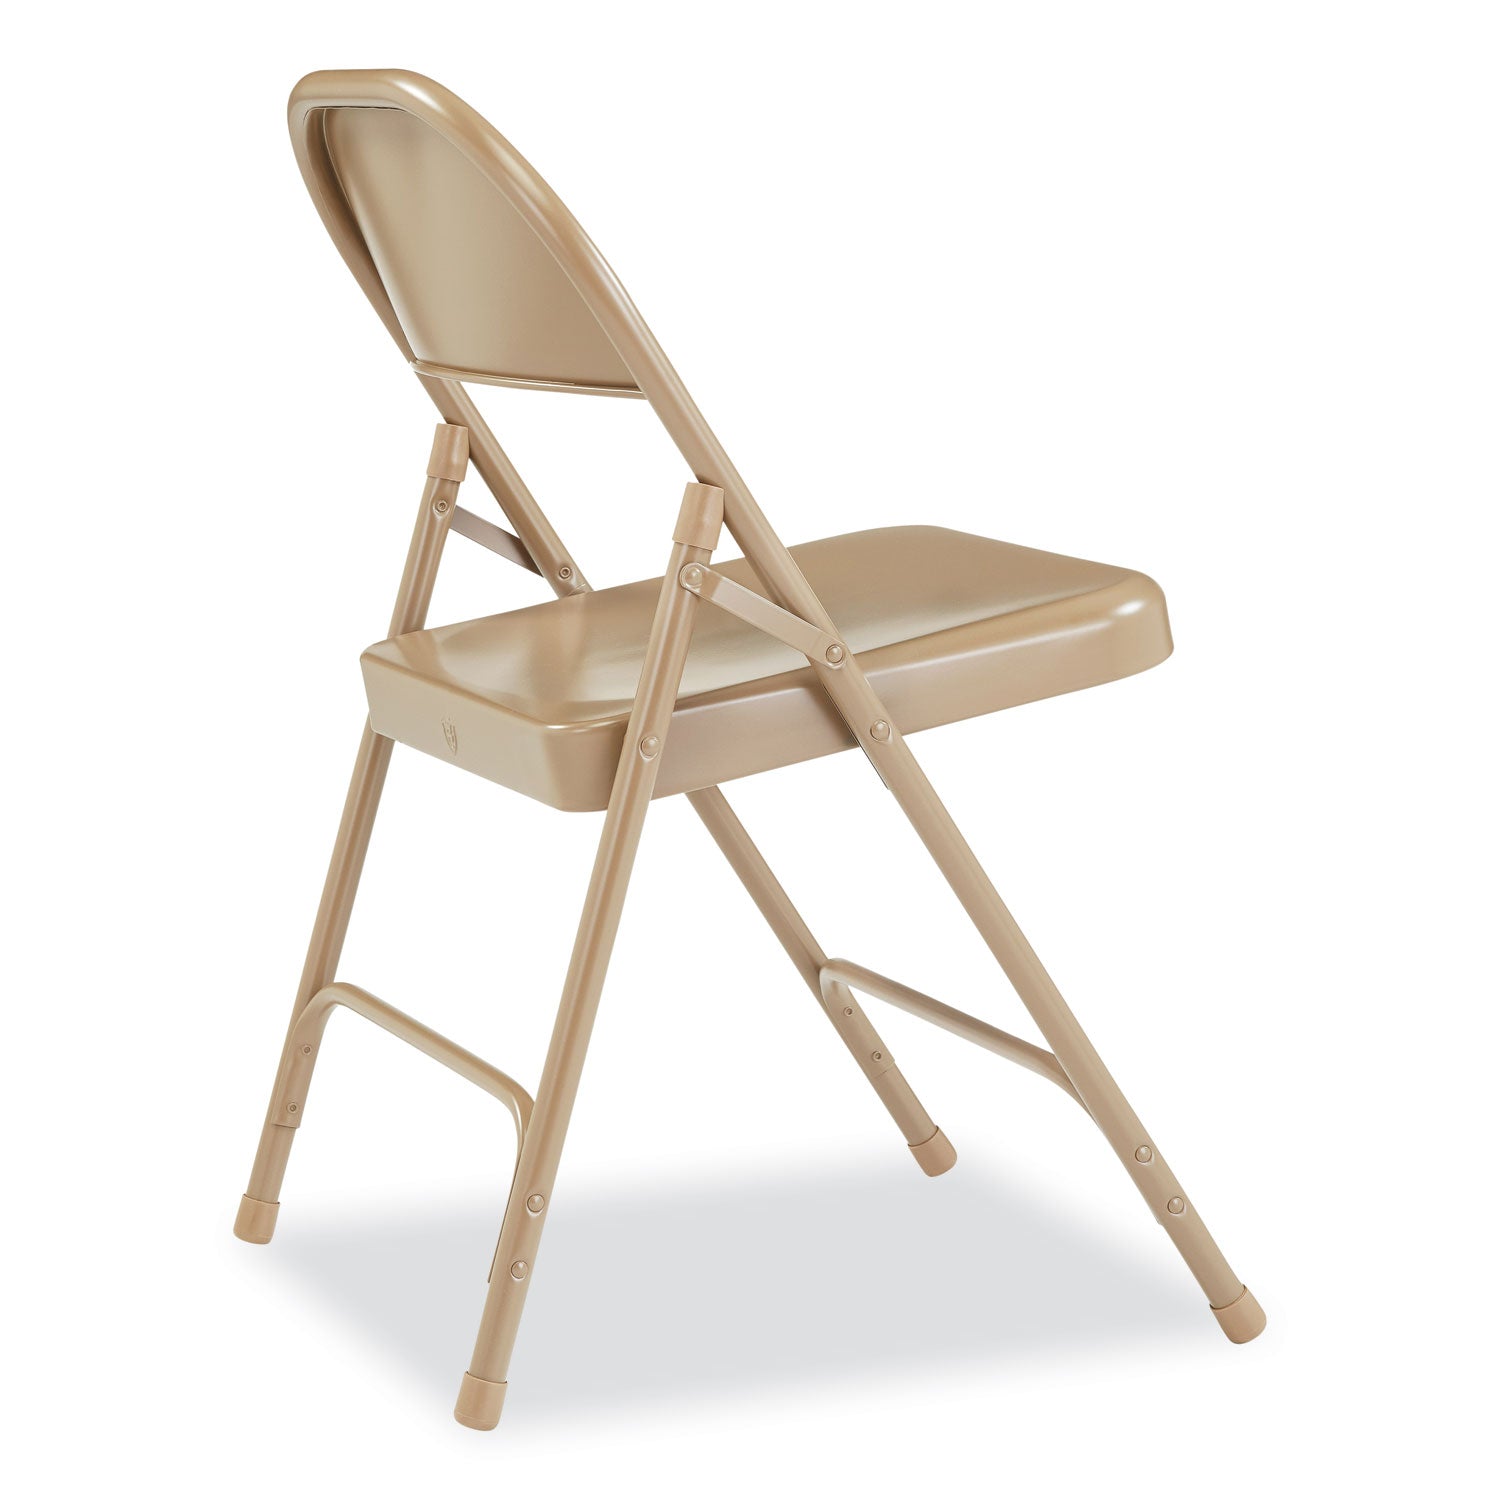 50-series-all-steel-folding-chair-supports-500-lb-1675-seat-ht-beige-seat-back-beige-base-4-ct-ships-in-1-3-bus-days_nps51 - 4